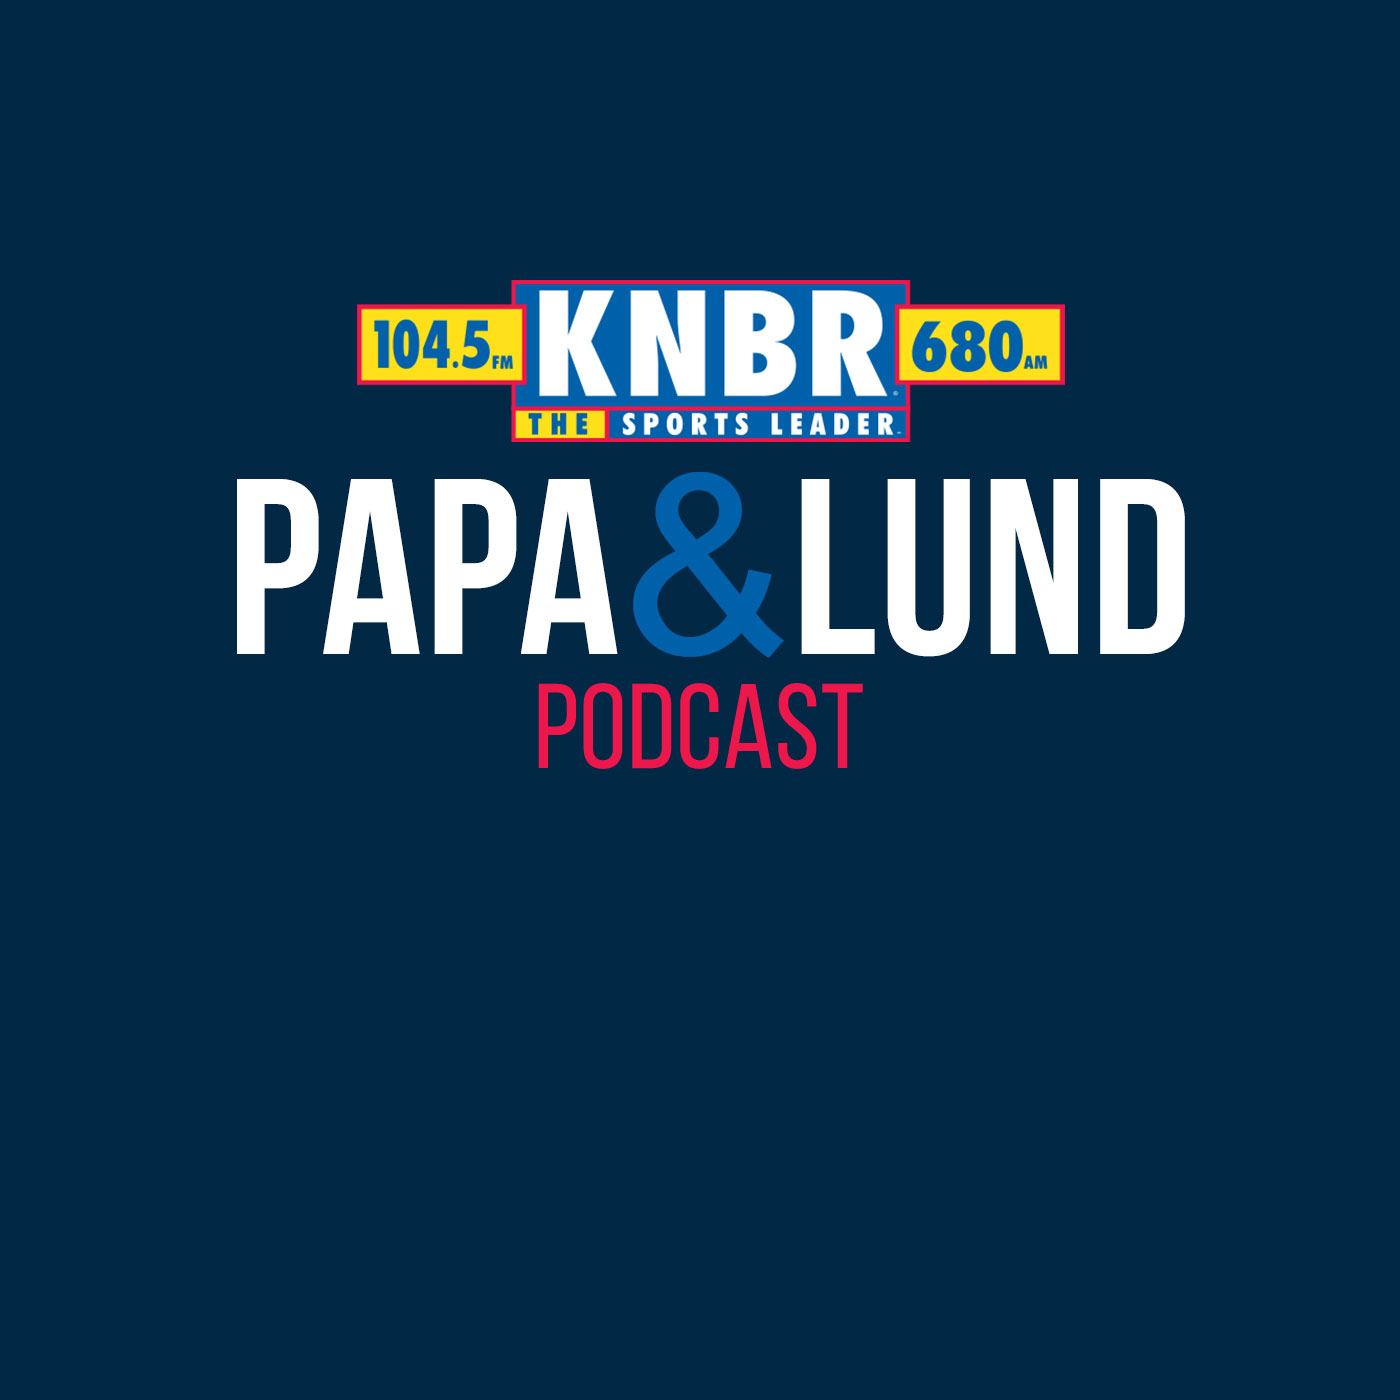 3-18 Laura Britt joins Papa & Lund to discuss joining the Womens Empowerment broadcast for the Warriors as well as how the Giants are looking at this stage of Spring Training